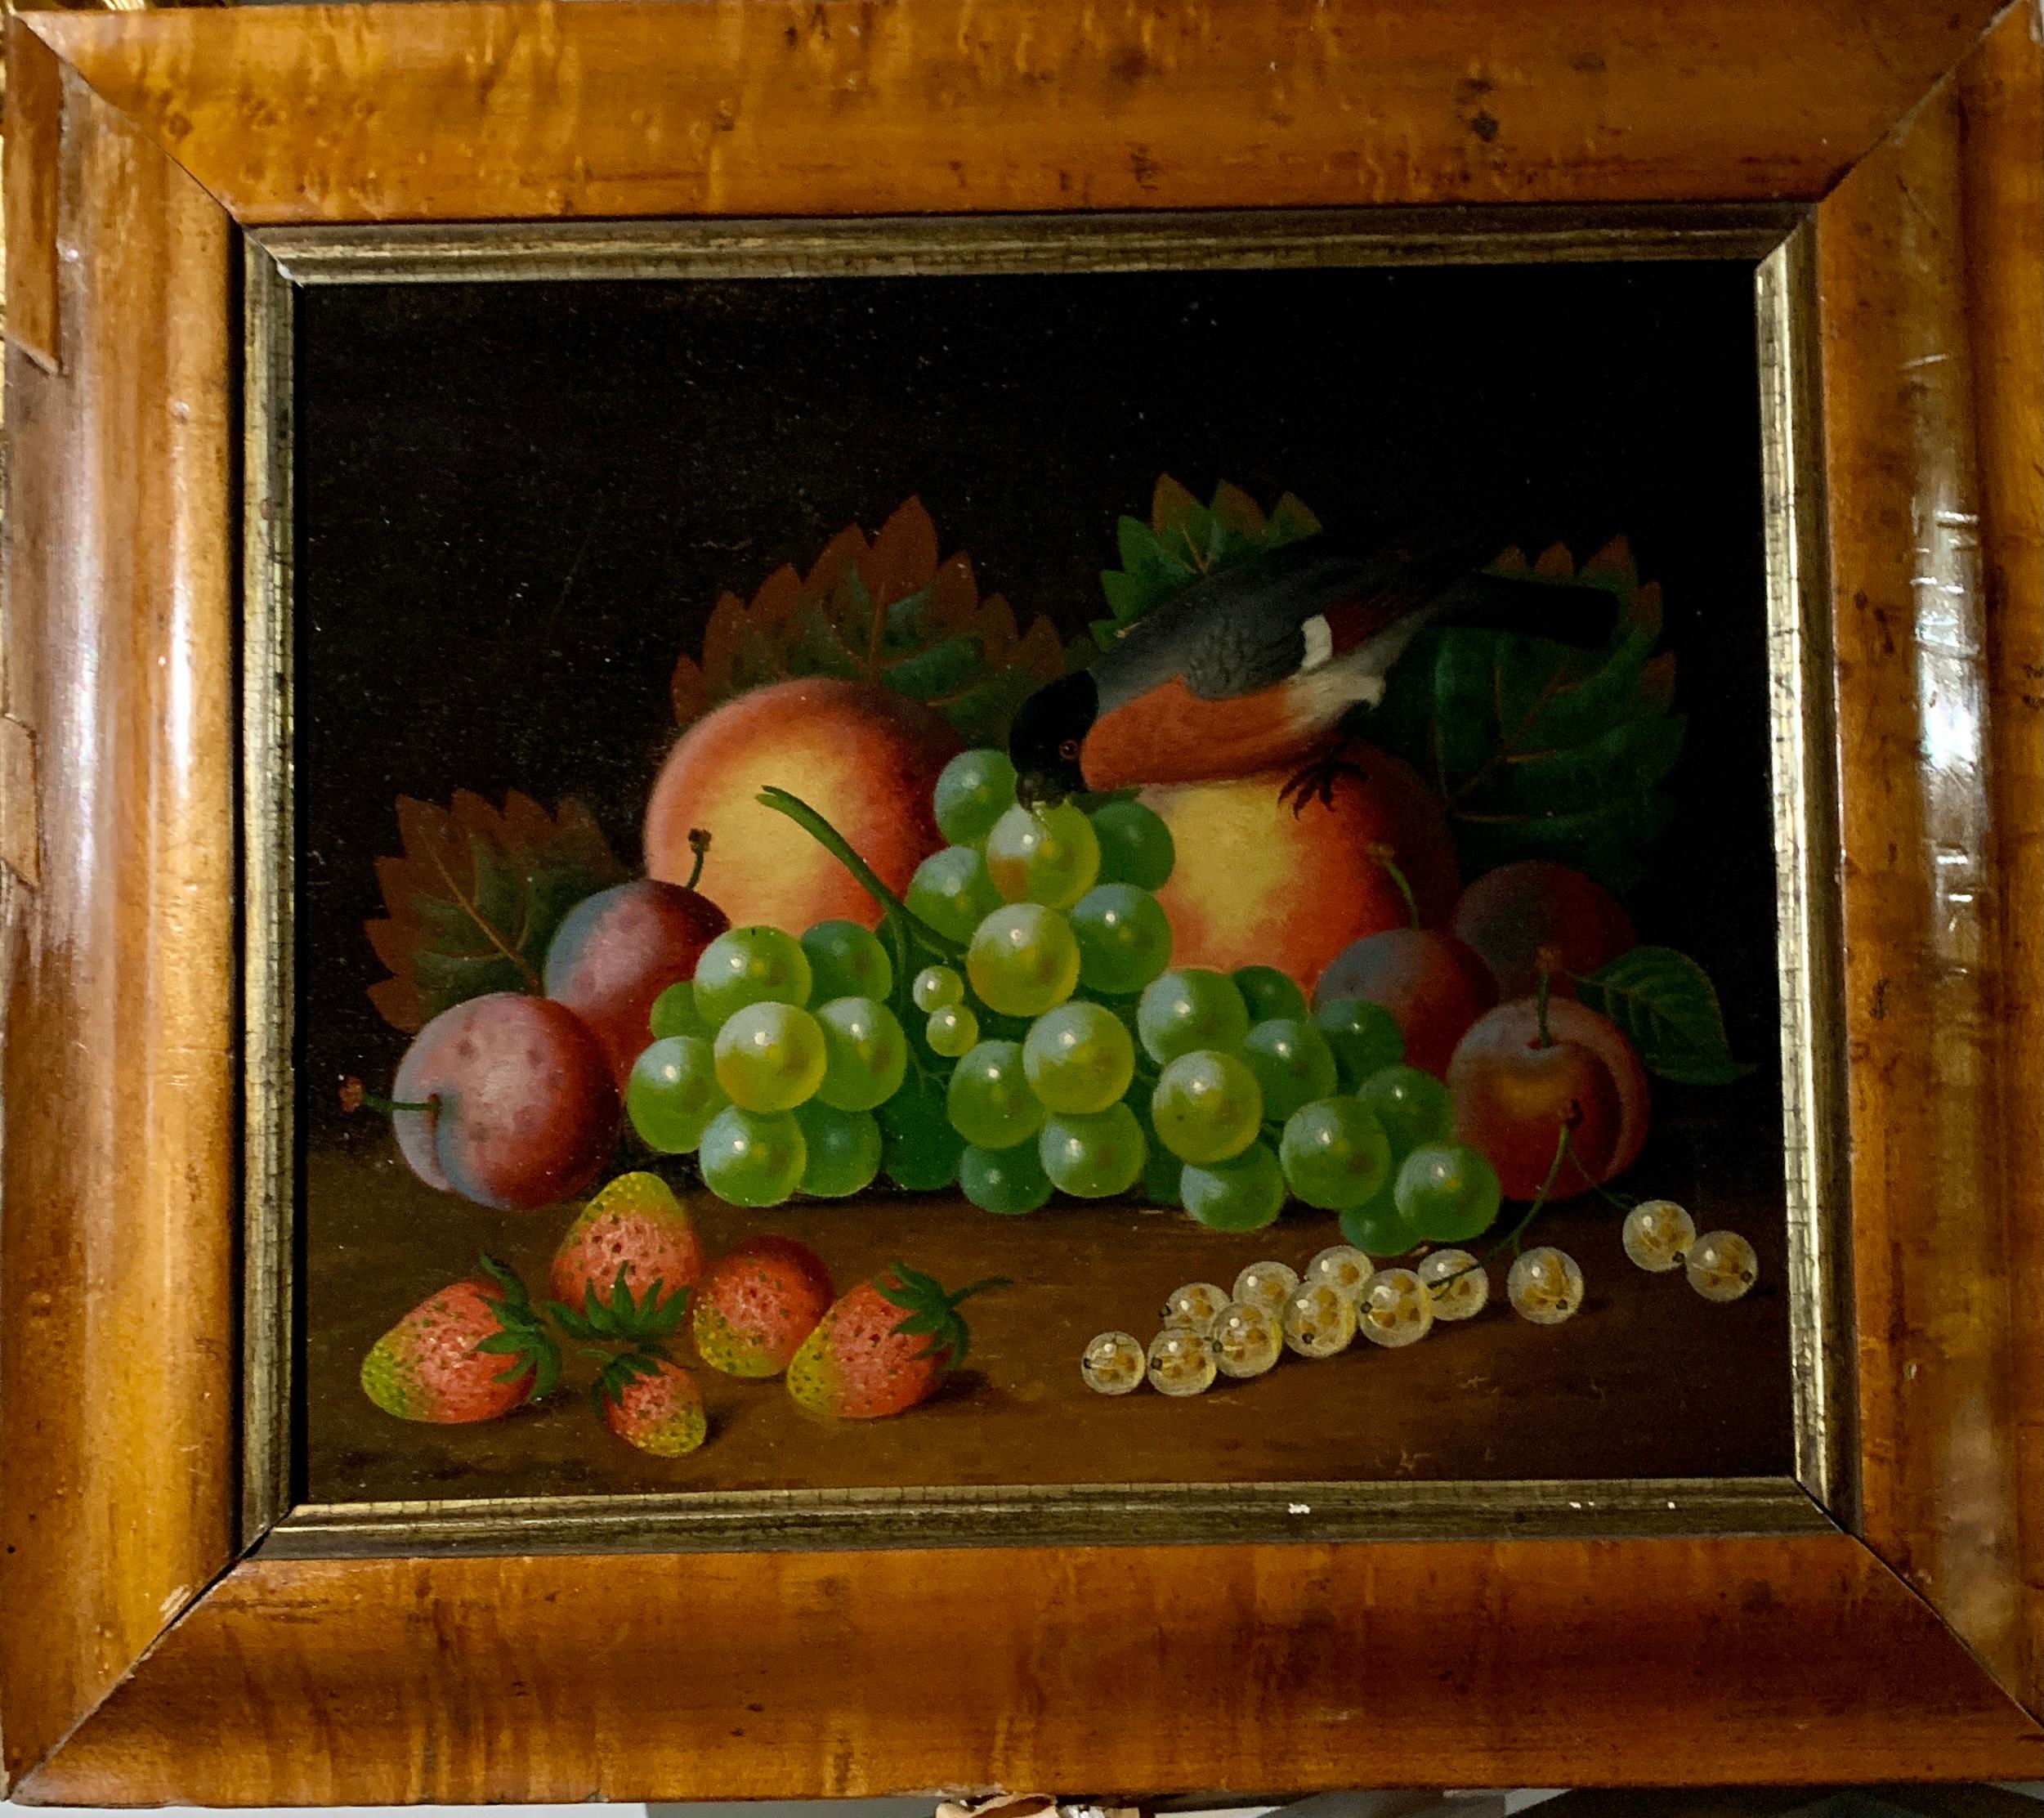 Early 19th century English still life of fruit and a chaffinch bird on a table. - Painting by Unknown